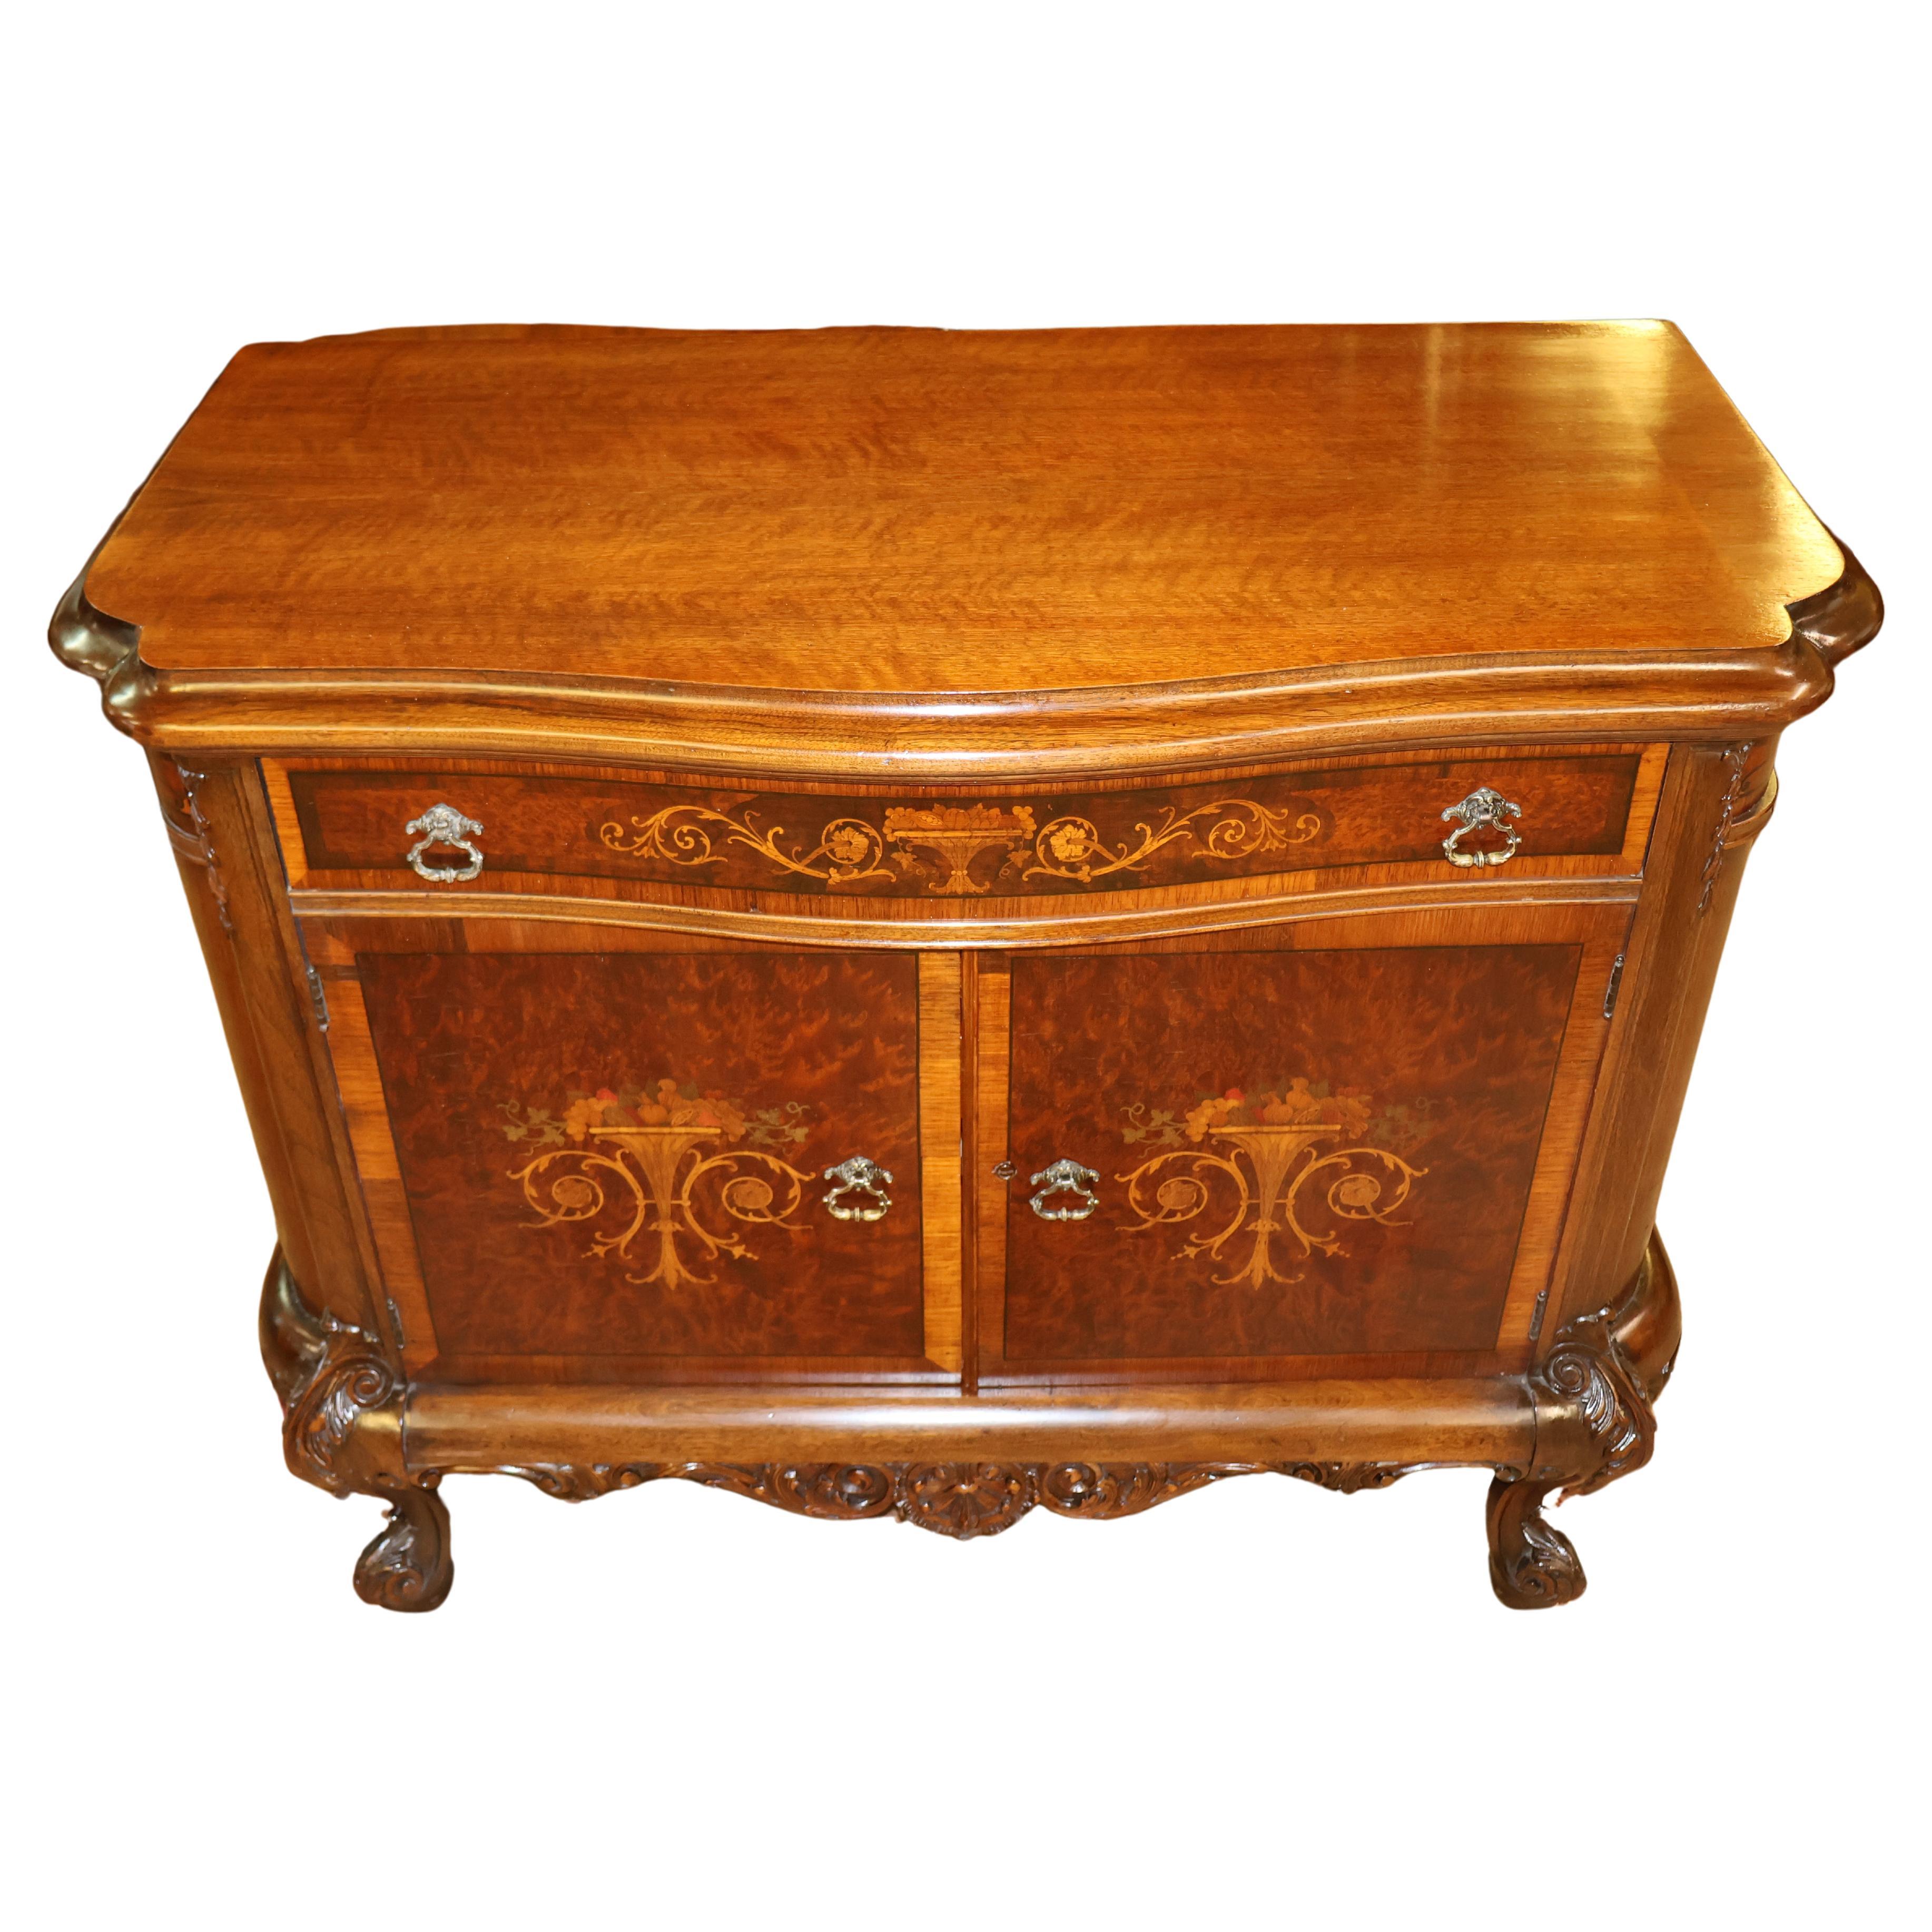 Rockford National Furniture Company Commodes and Chests of Drawers